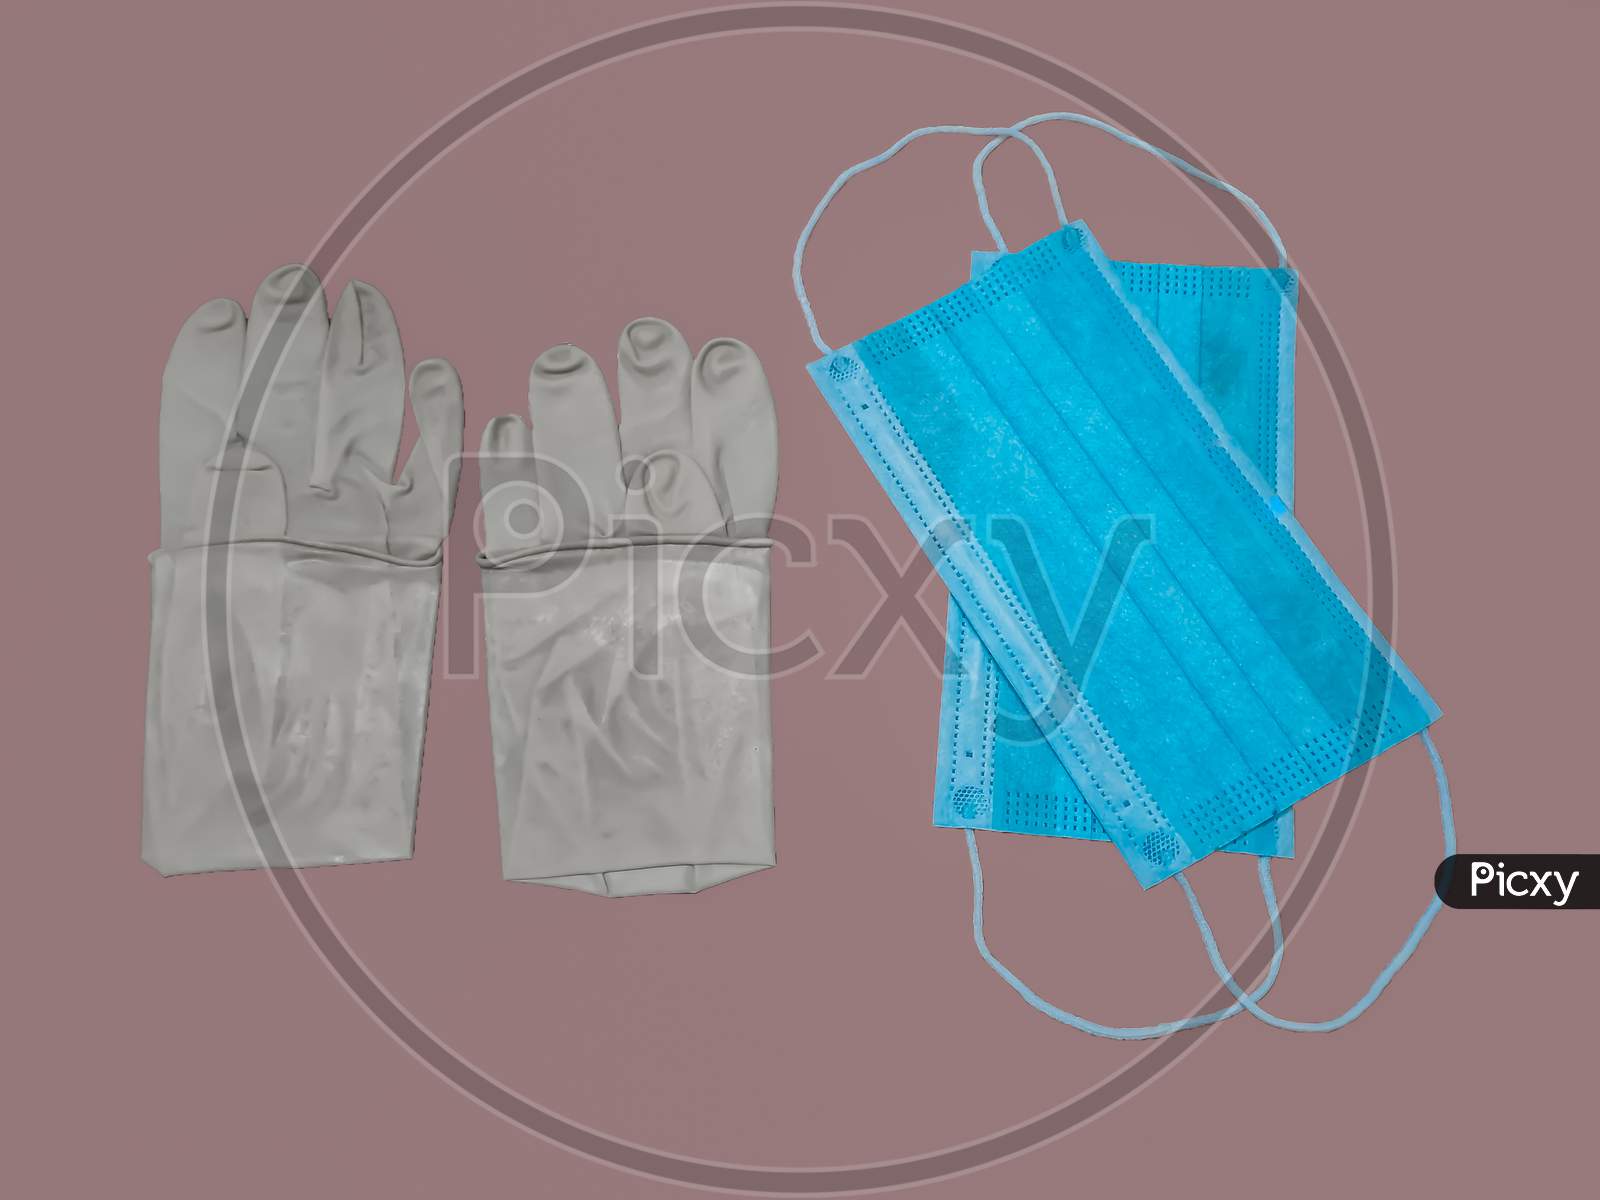 A Pair Of Rubber Medical Gloves And Surgical Mask Isolated On gray Background